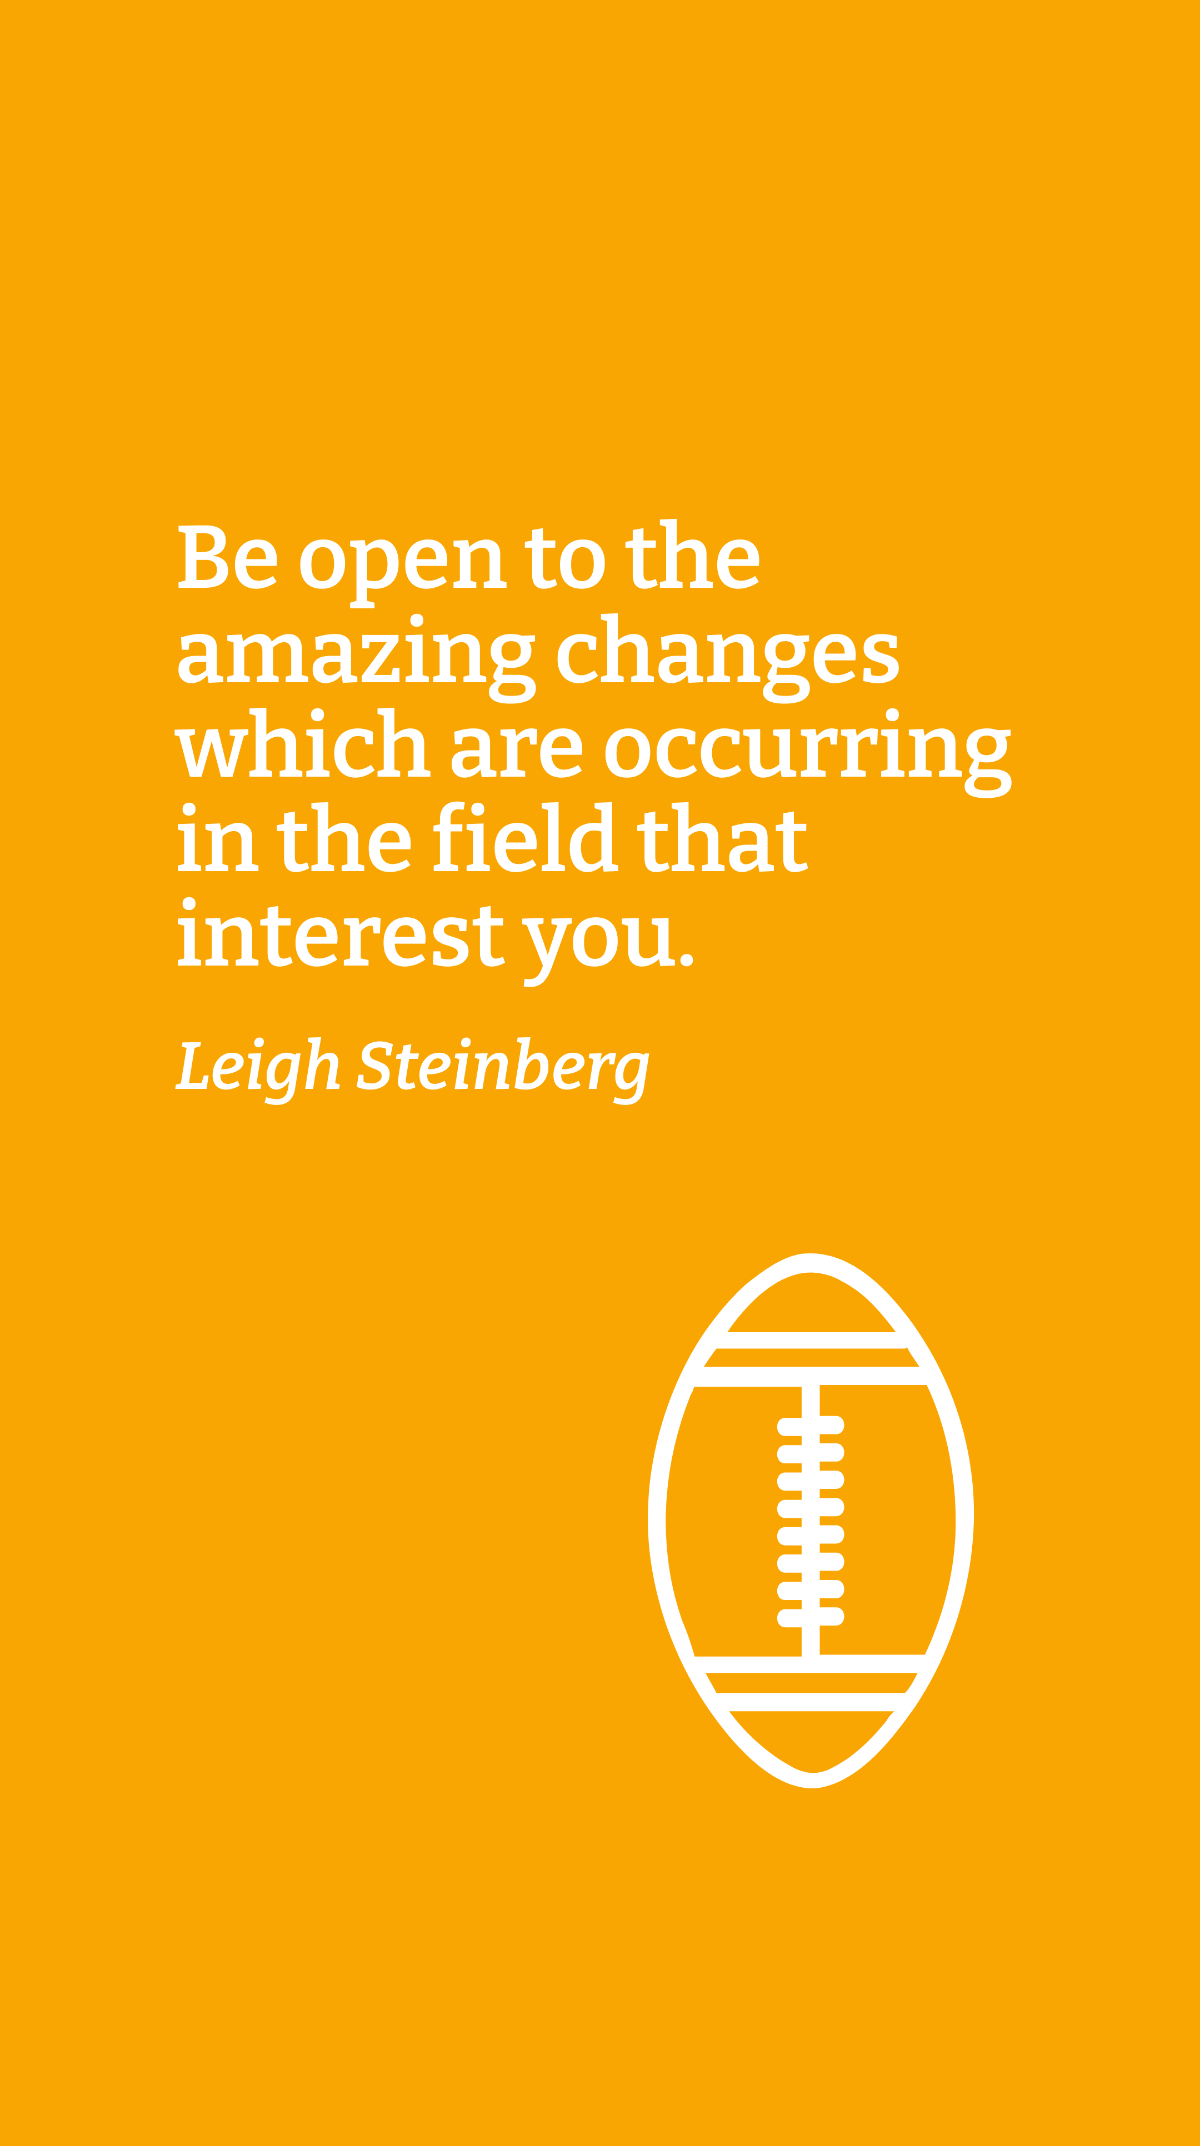 Leigh Steinberg - Be open to the amazing changes which are occurring in the field that interest you. Template